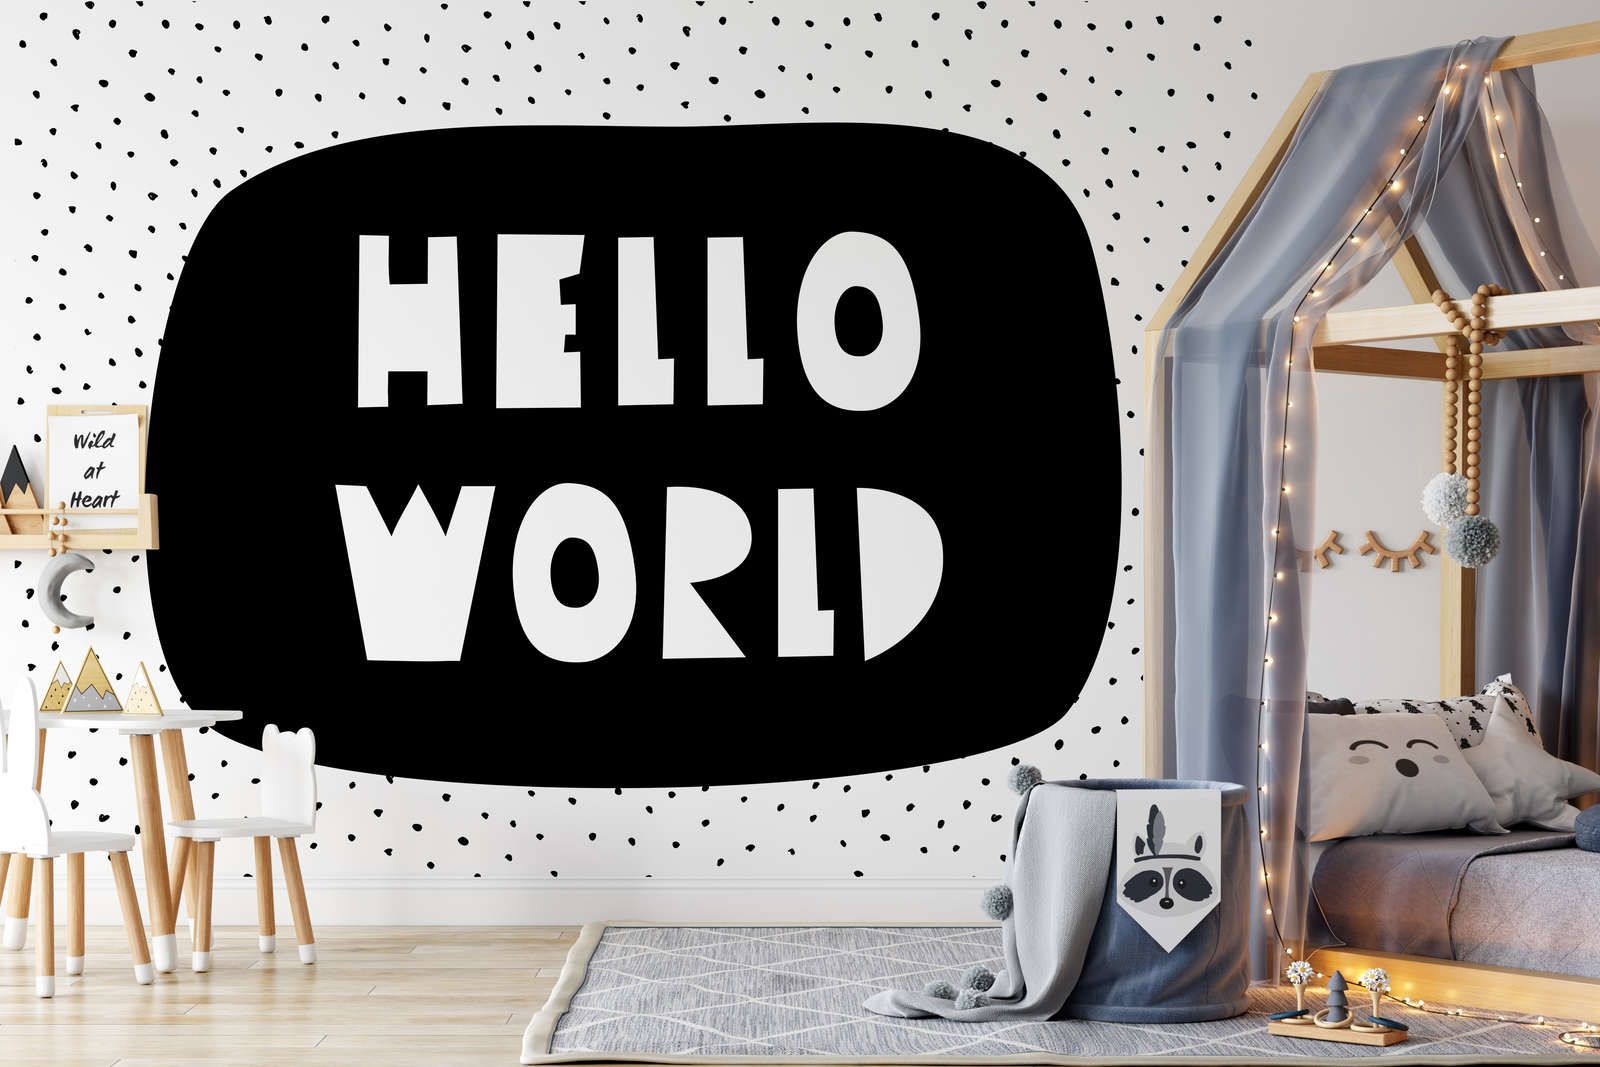             Photo wallpaper for children's room with lettering "Hello World" - Smooth & slightly shiny non-woven
        